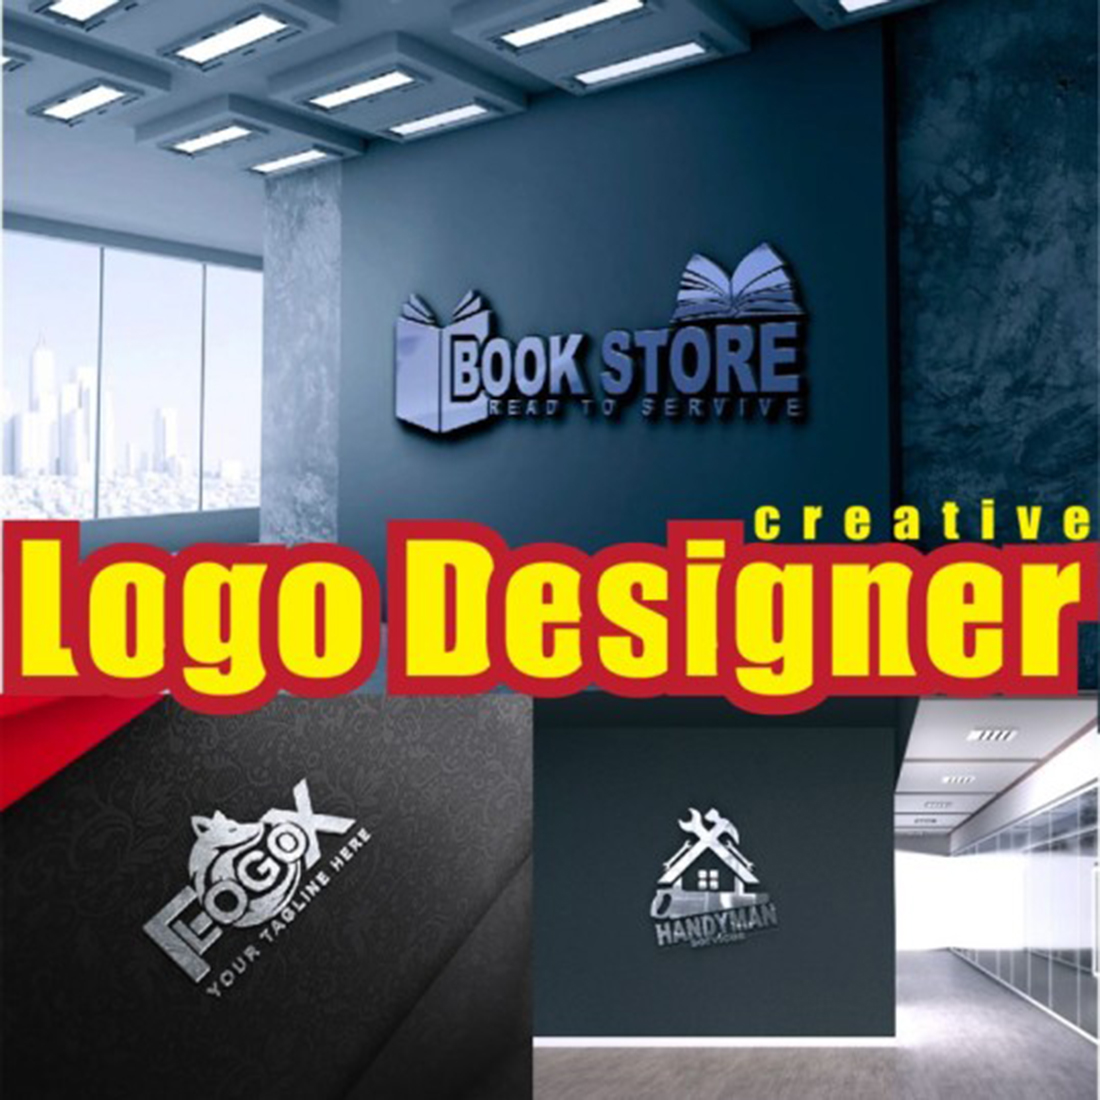 I am selling logos for your business in just $8 cover image.